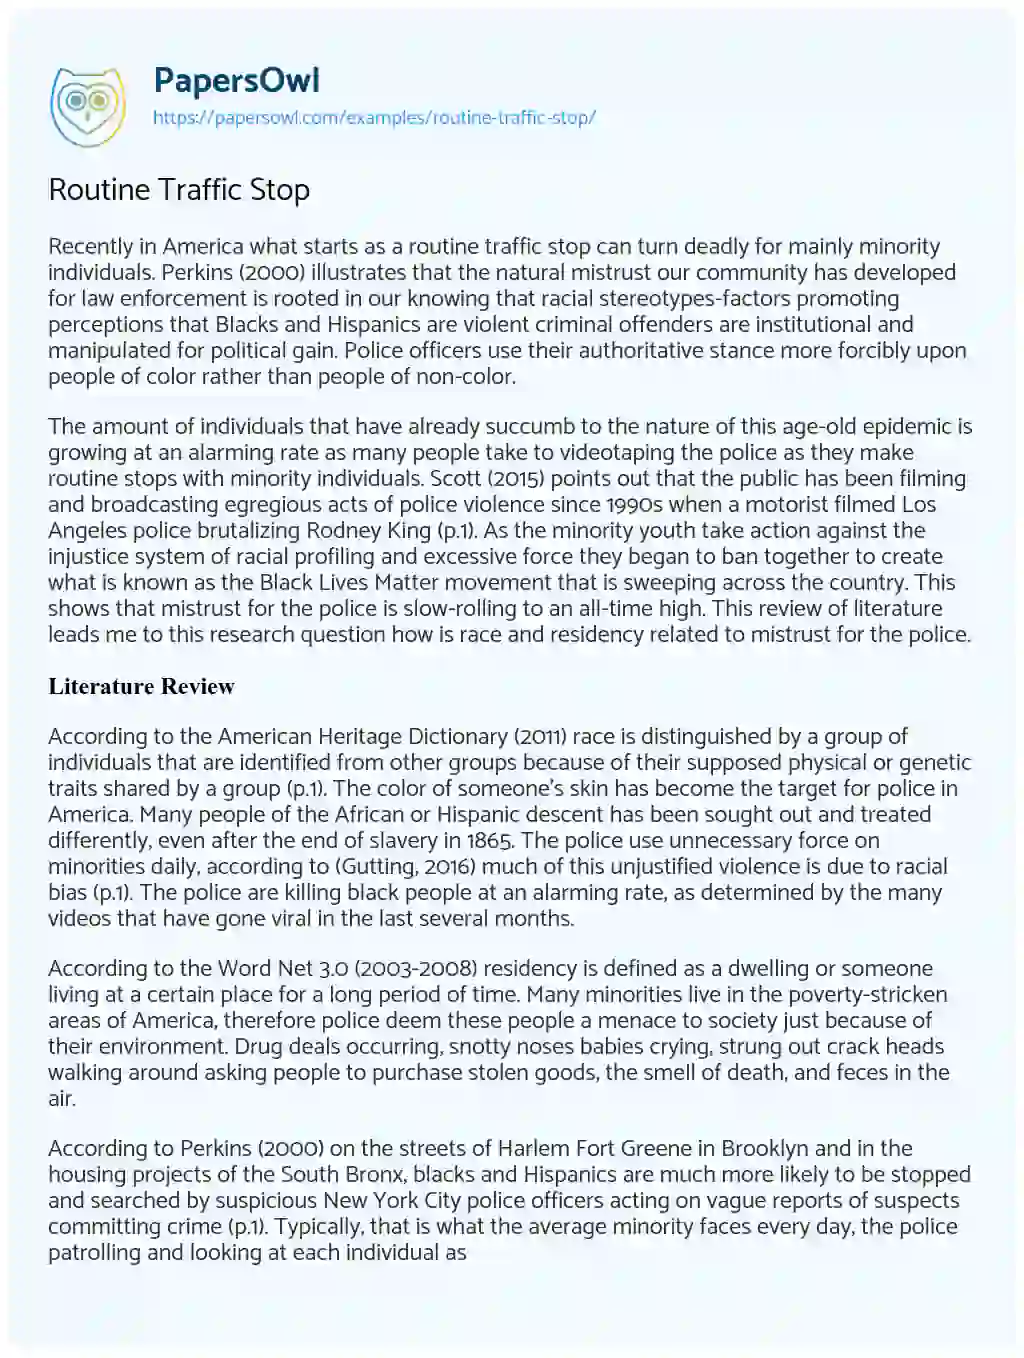 Essay on Routine Traffic Stop